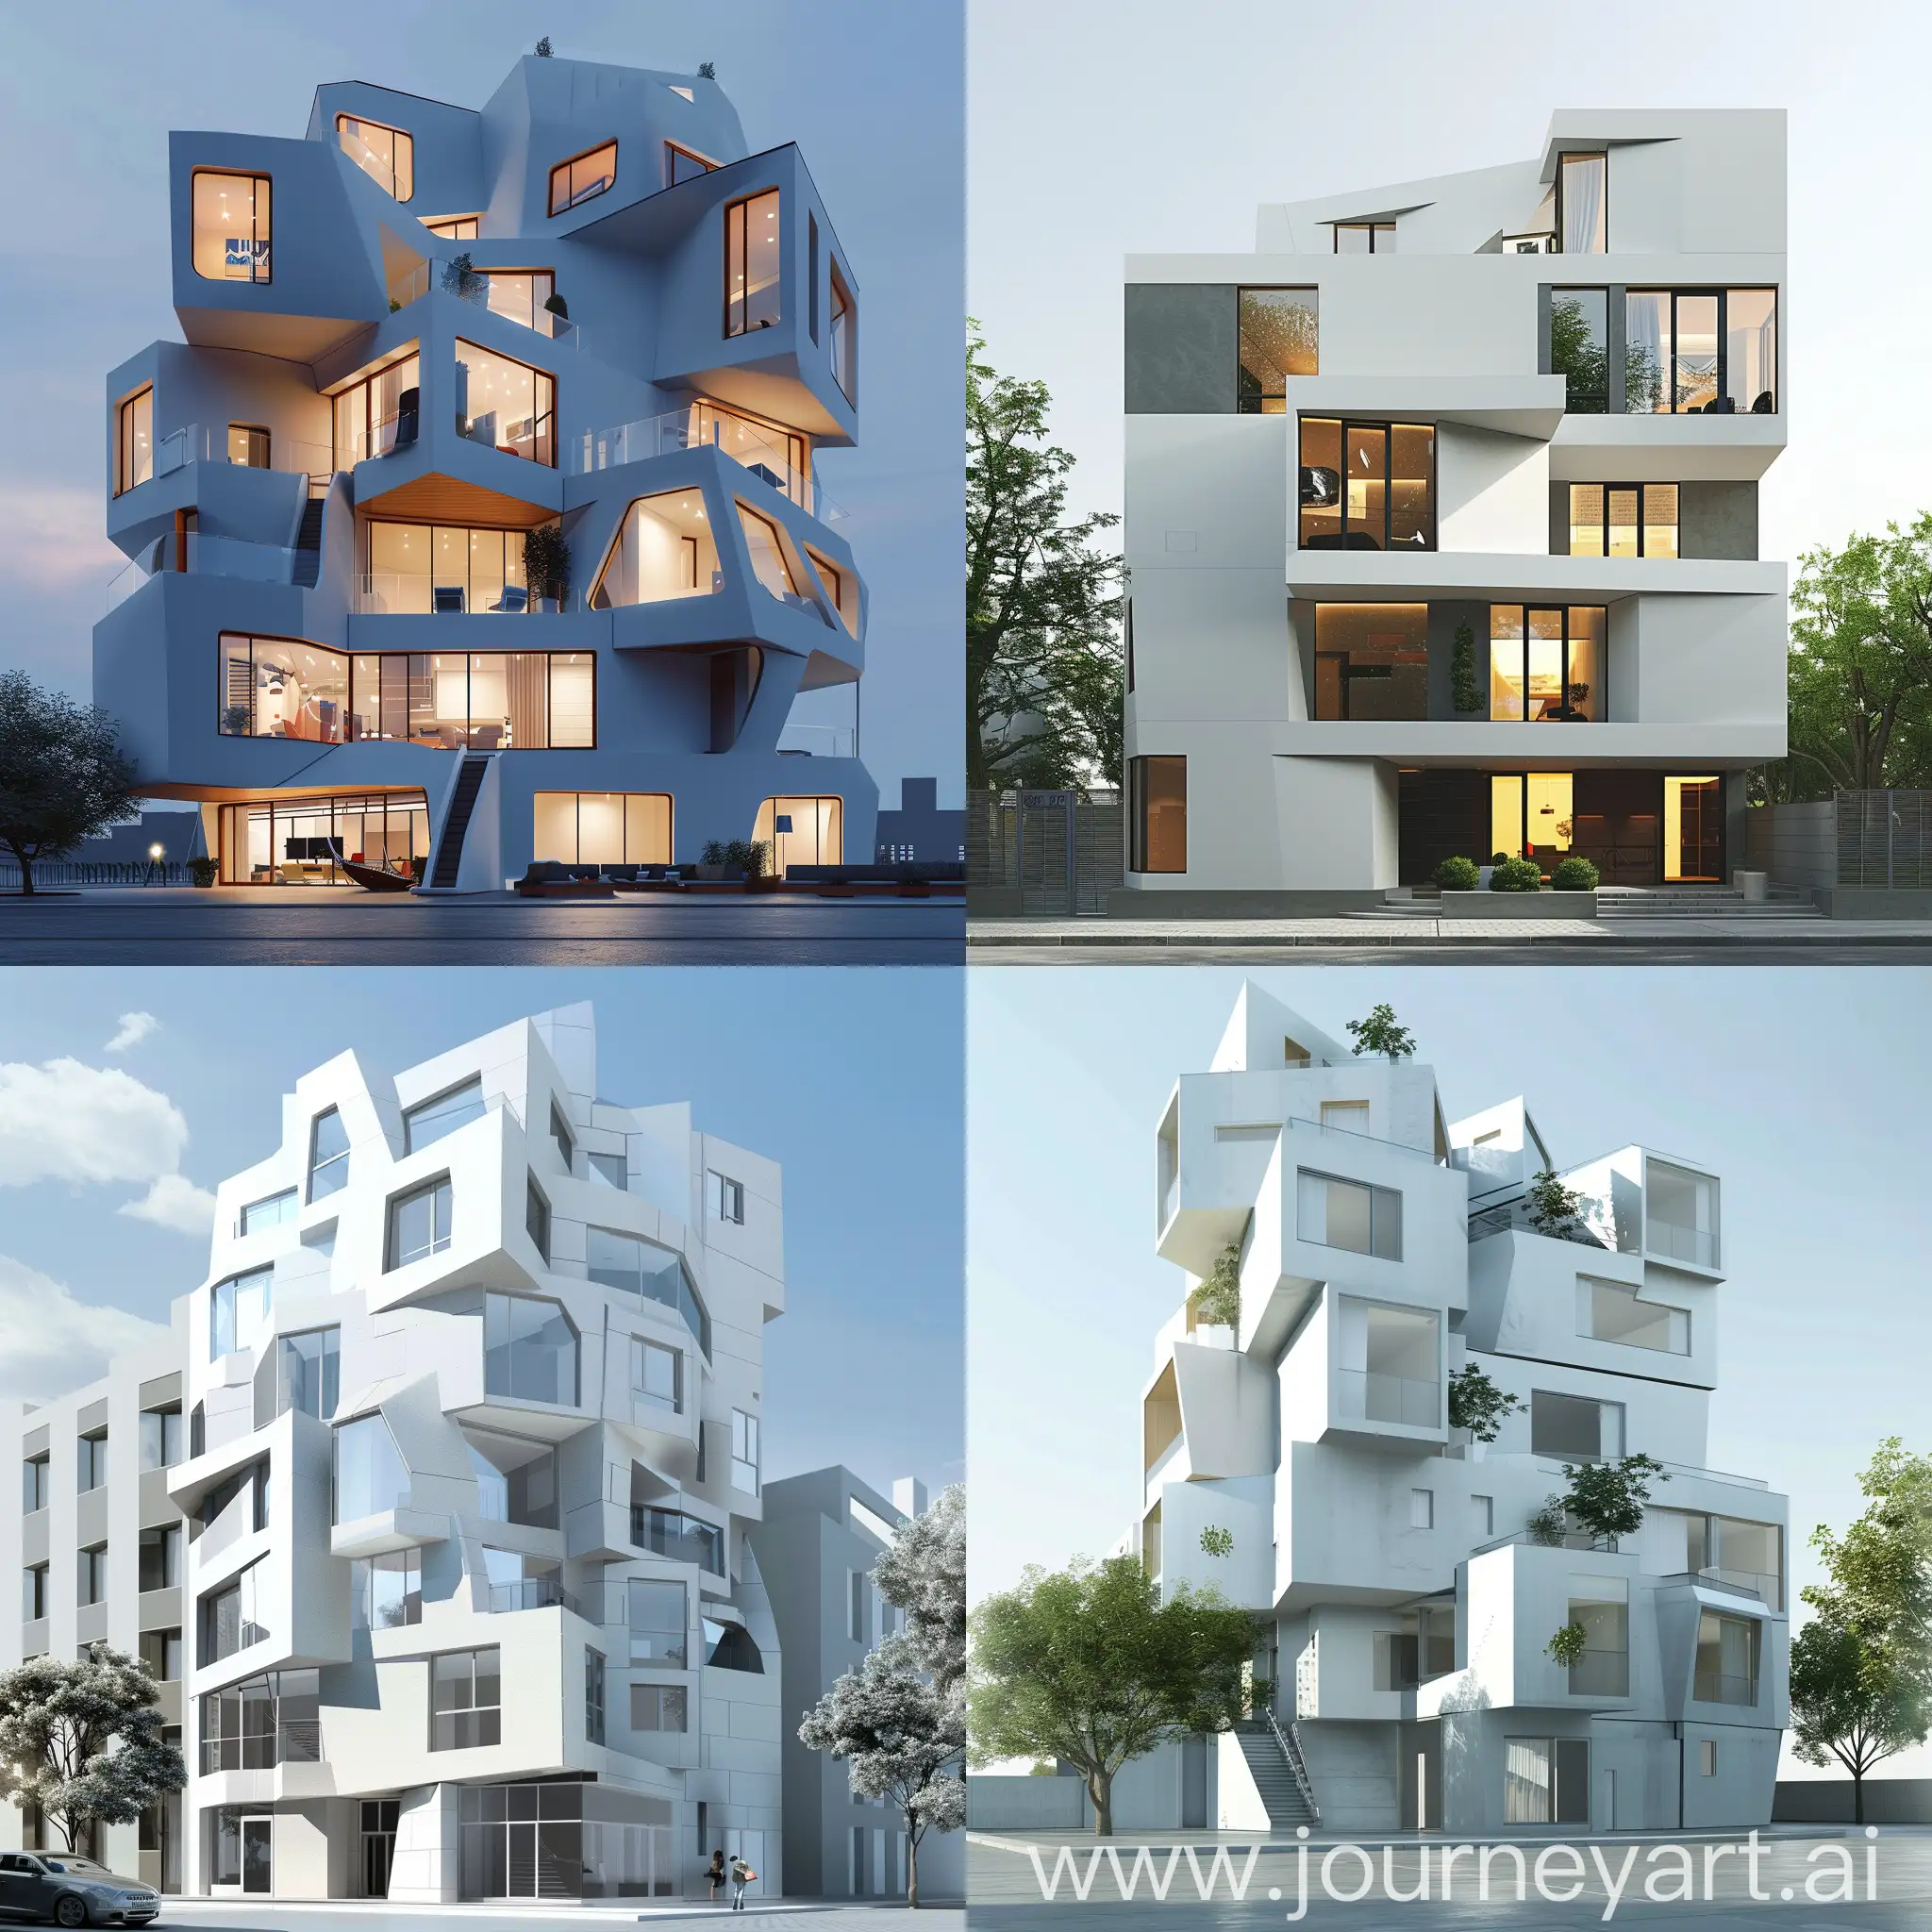 design of modern elevation for 4 floors apartment , so avangard and minimalistic facade as an architect , by Frank Gehry